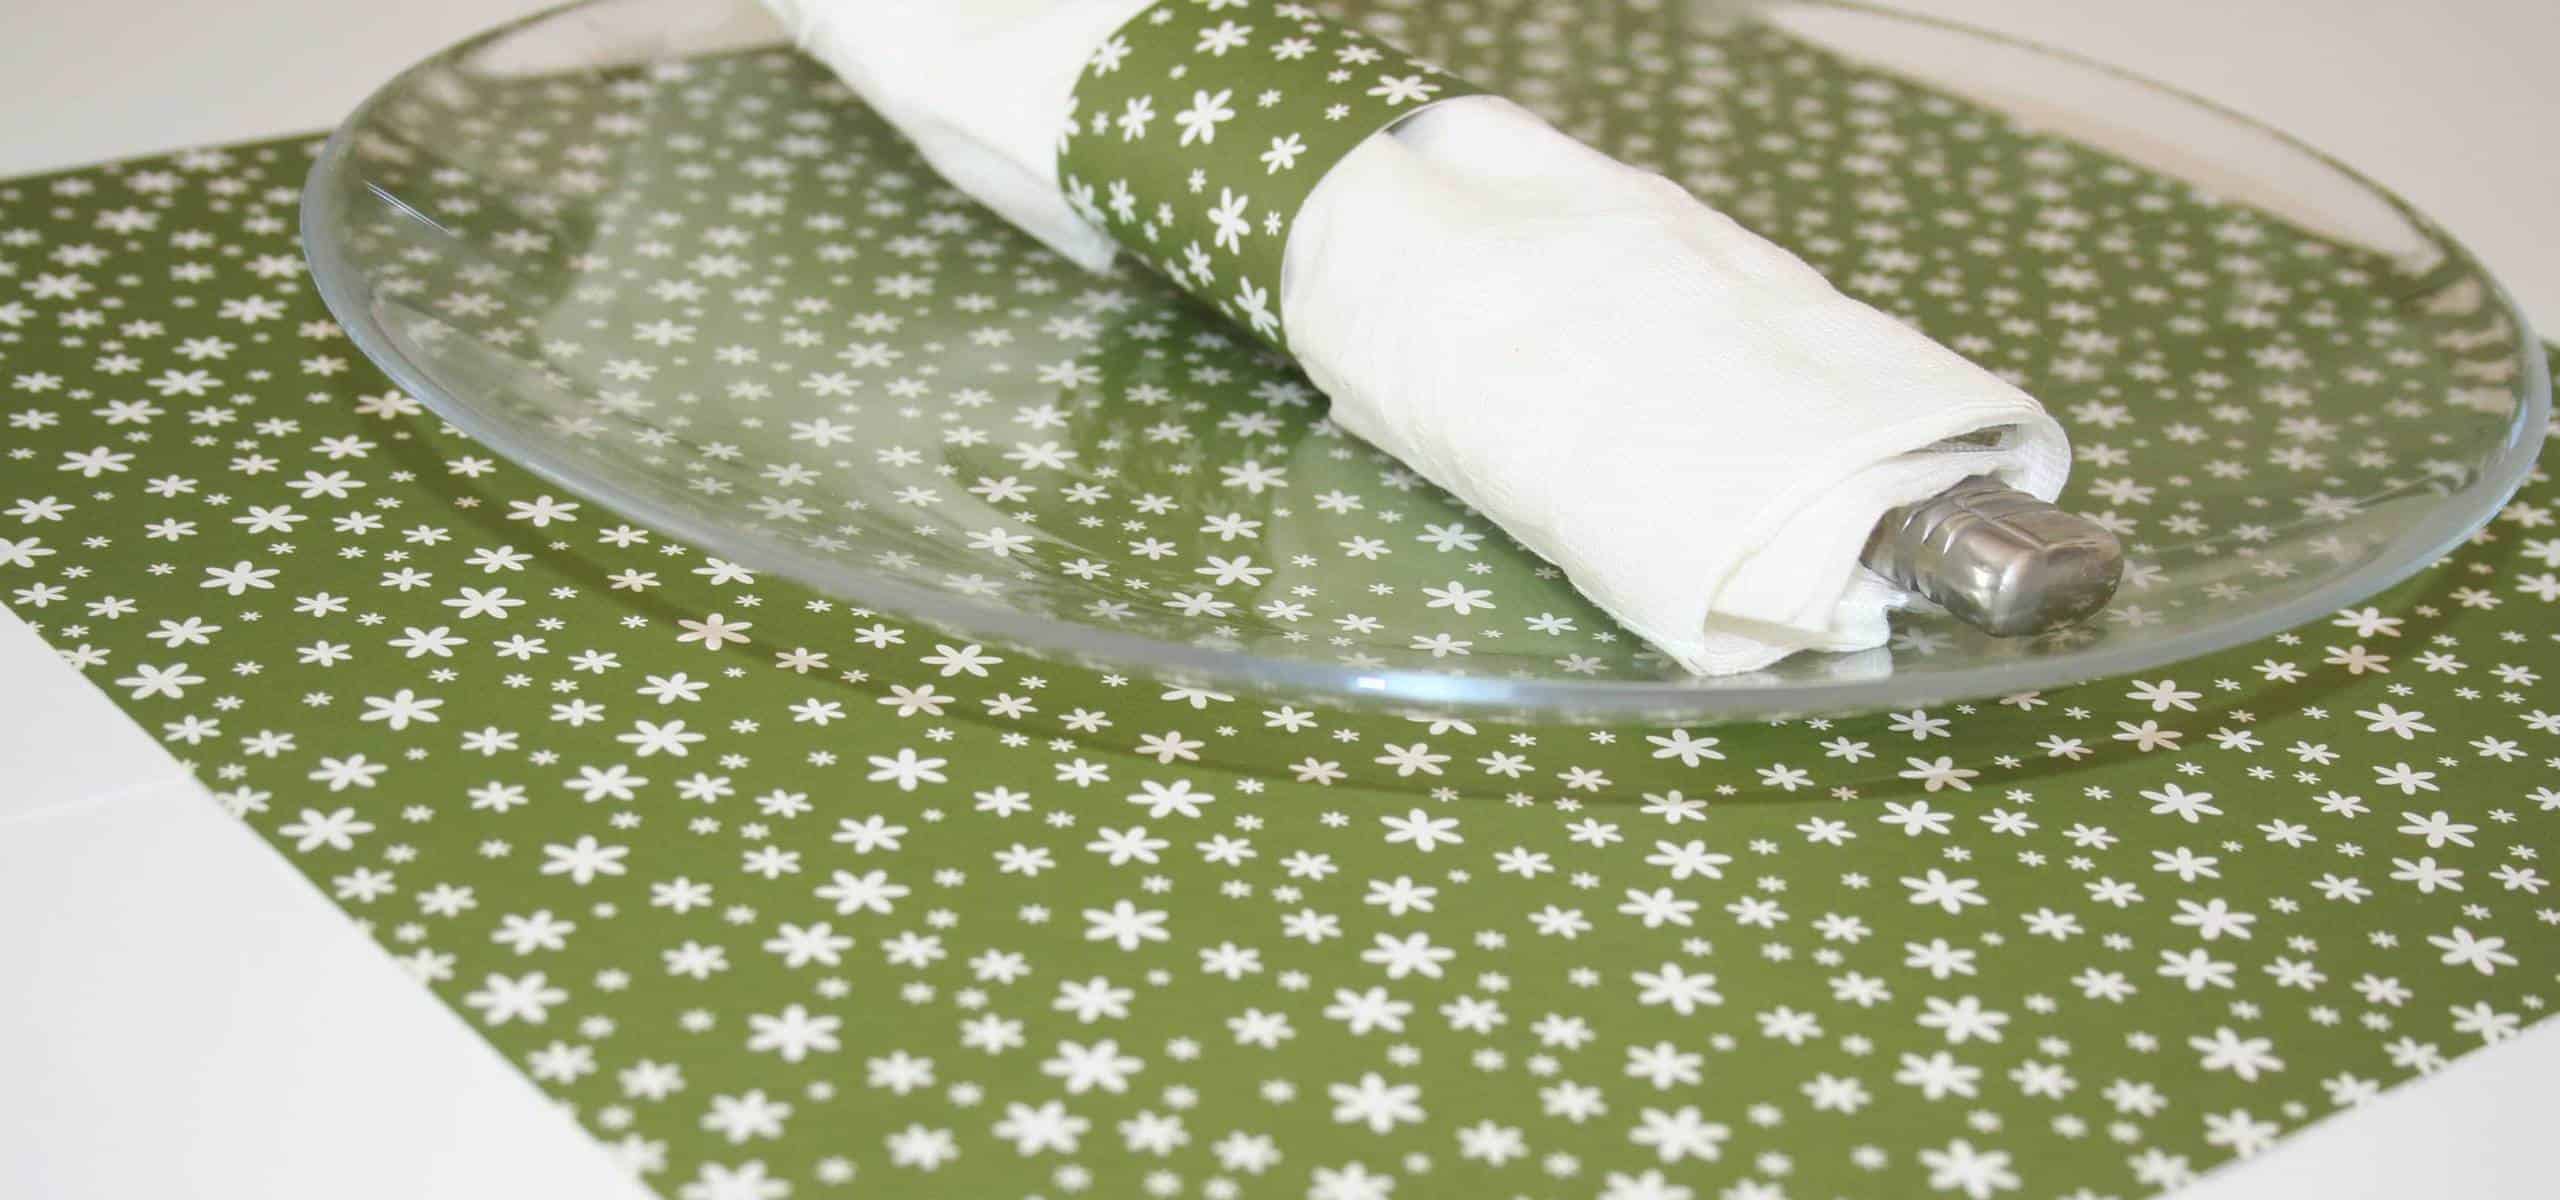 How To Make A Placemat Out Of Paper